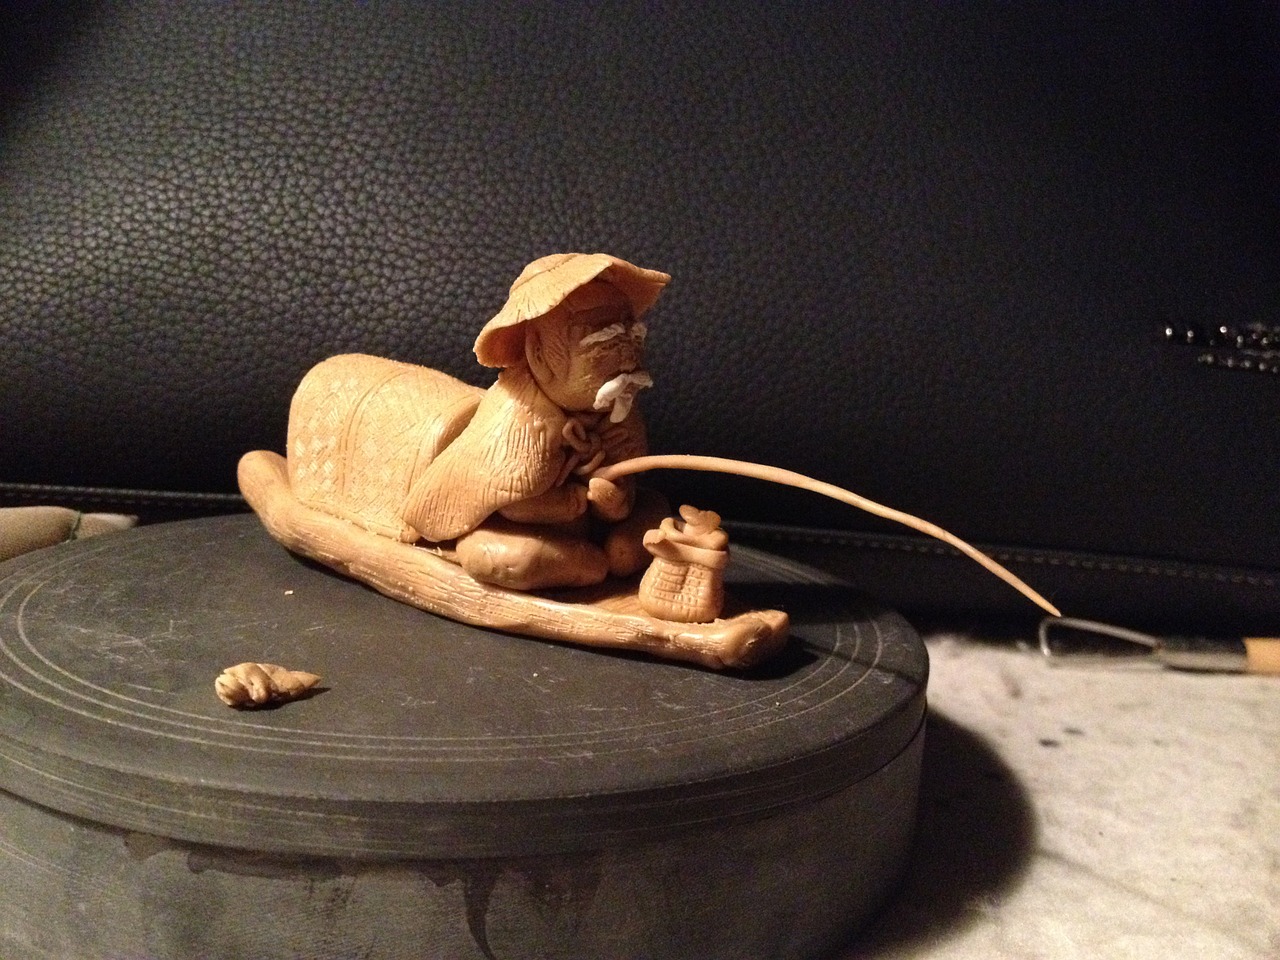 clay sculpture fisher clay figurine free photo